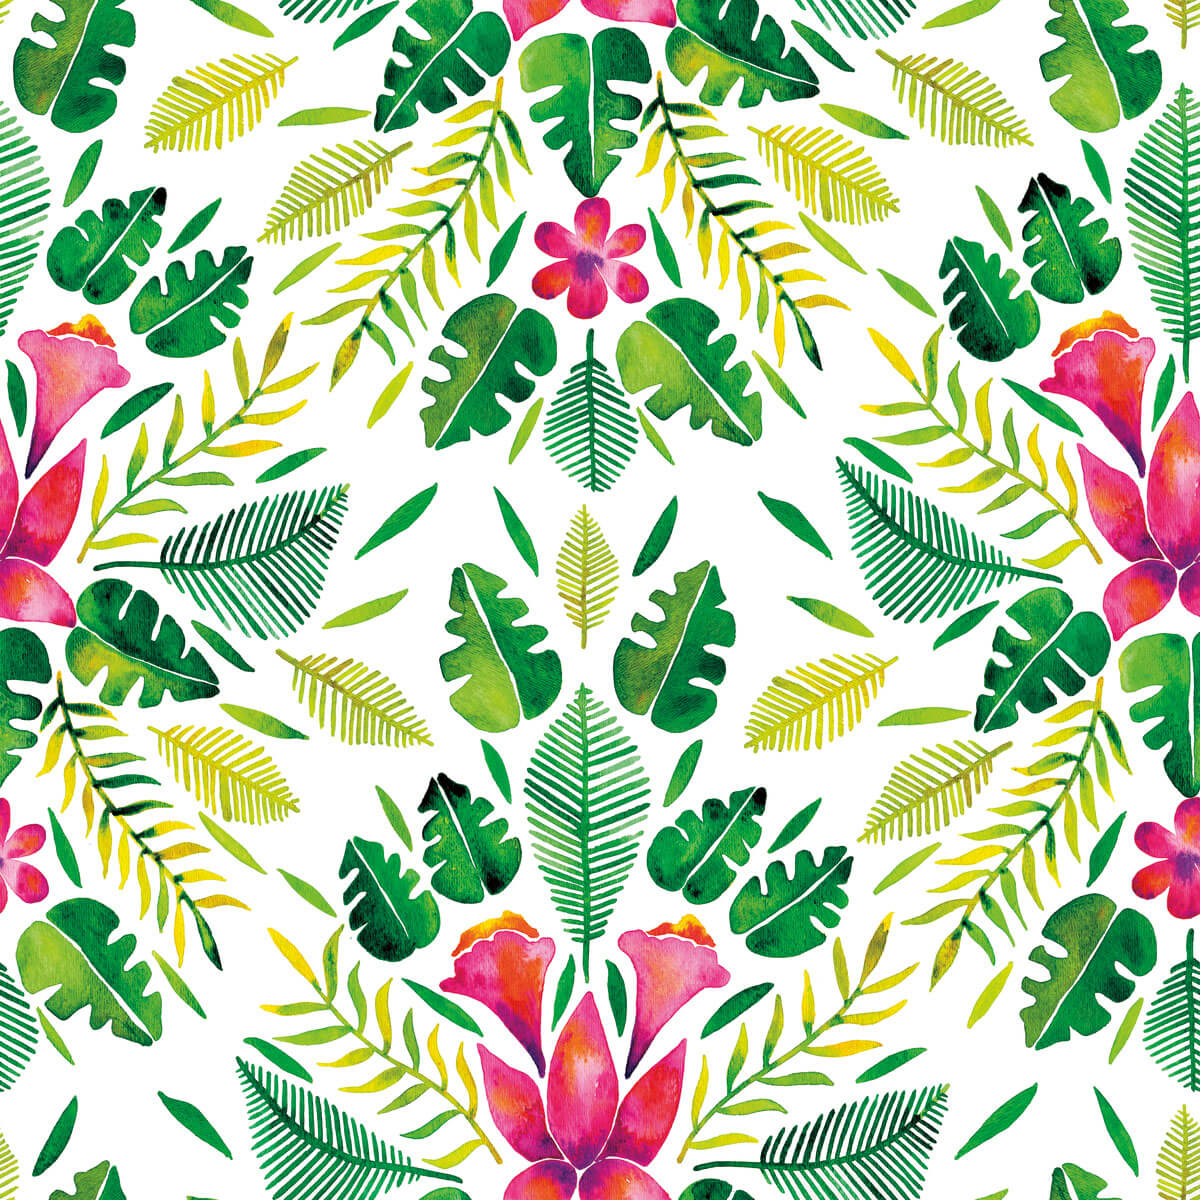 CatCoq Tropical Peel and Stick Wallpaper - SAMPLE ONLY